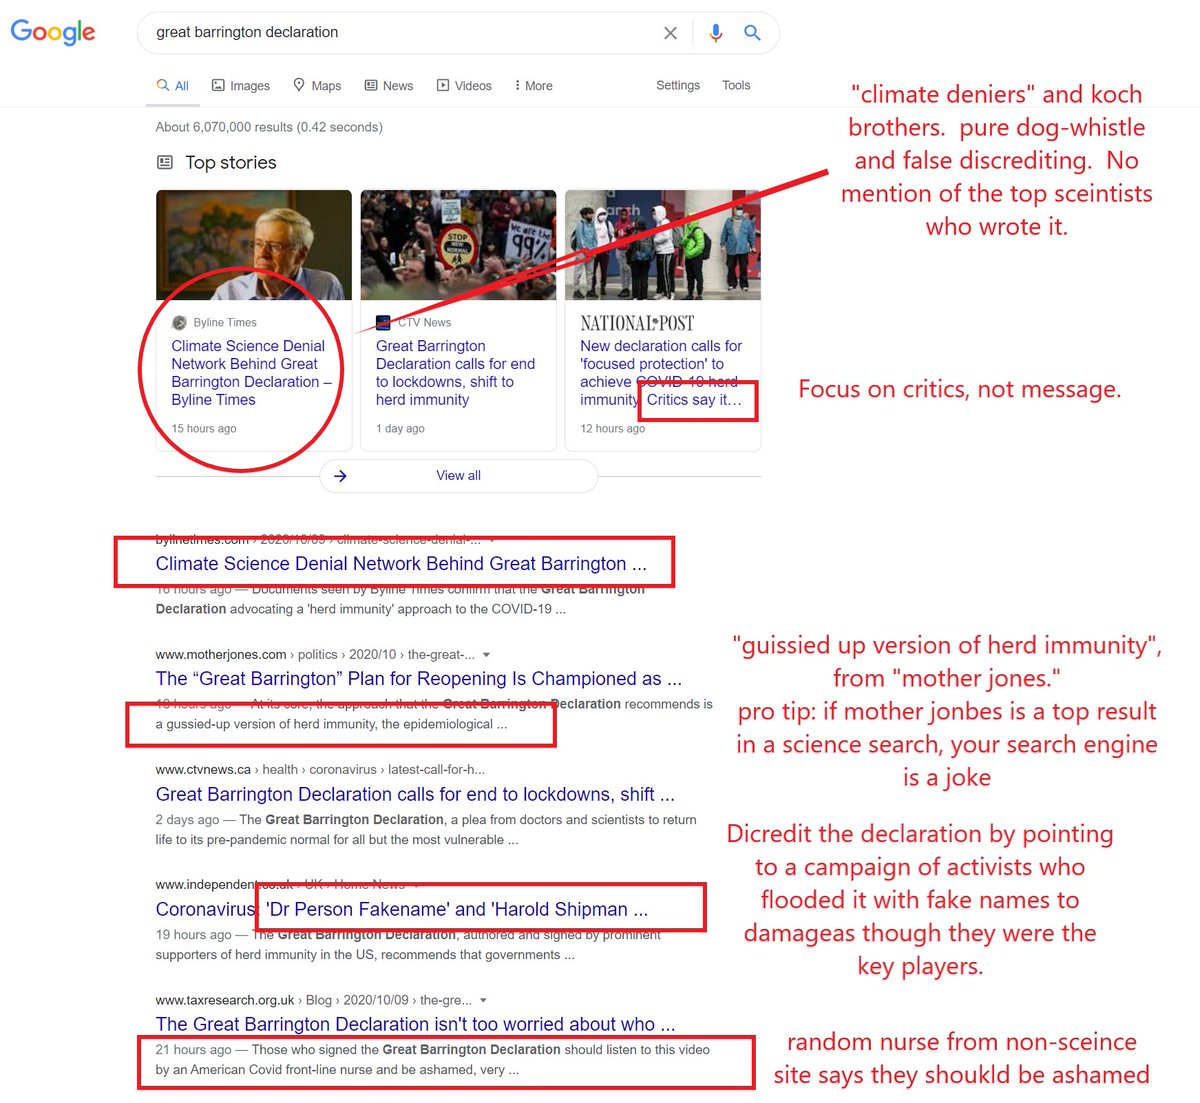 the google results for "great barrington declaration" are simply not search results at all.it's a propagandistic hit piece ducking the science, ignoring the credentials of the authors, failing to show the declaration, and spinning it as some kind of fringe cabal of "deniers."